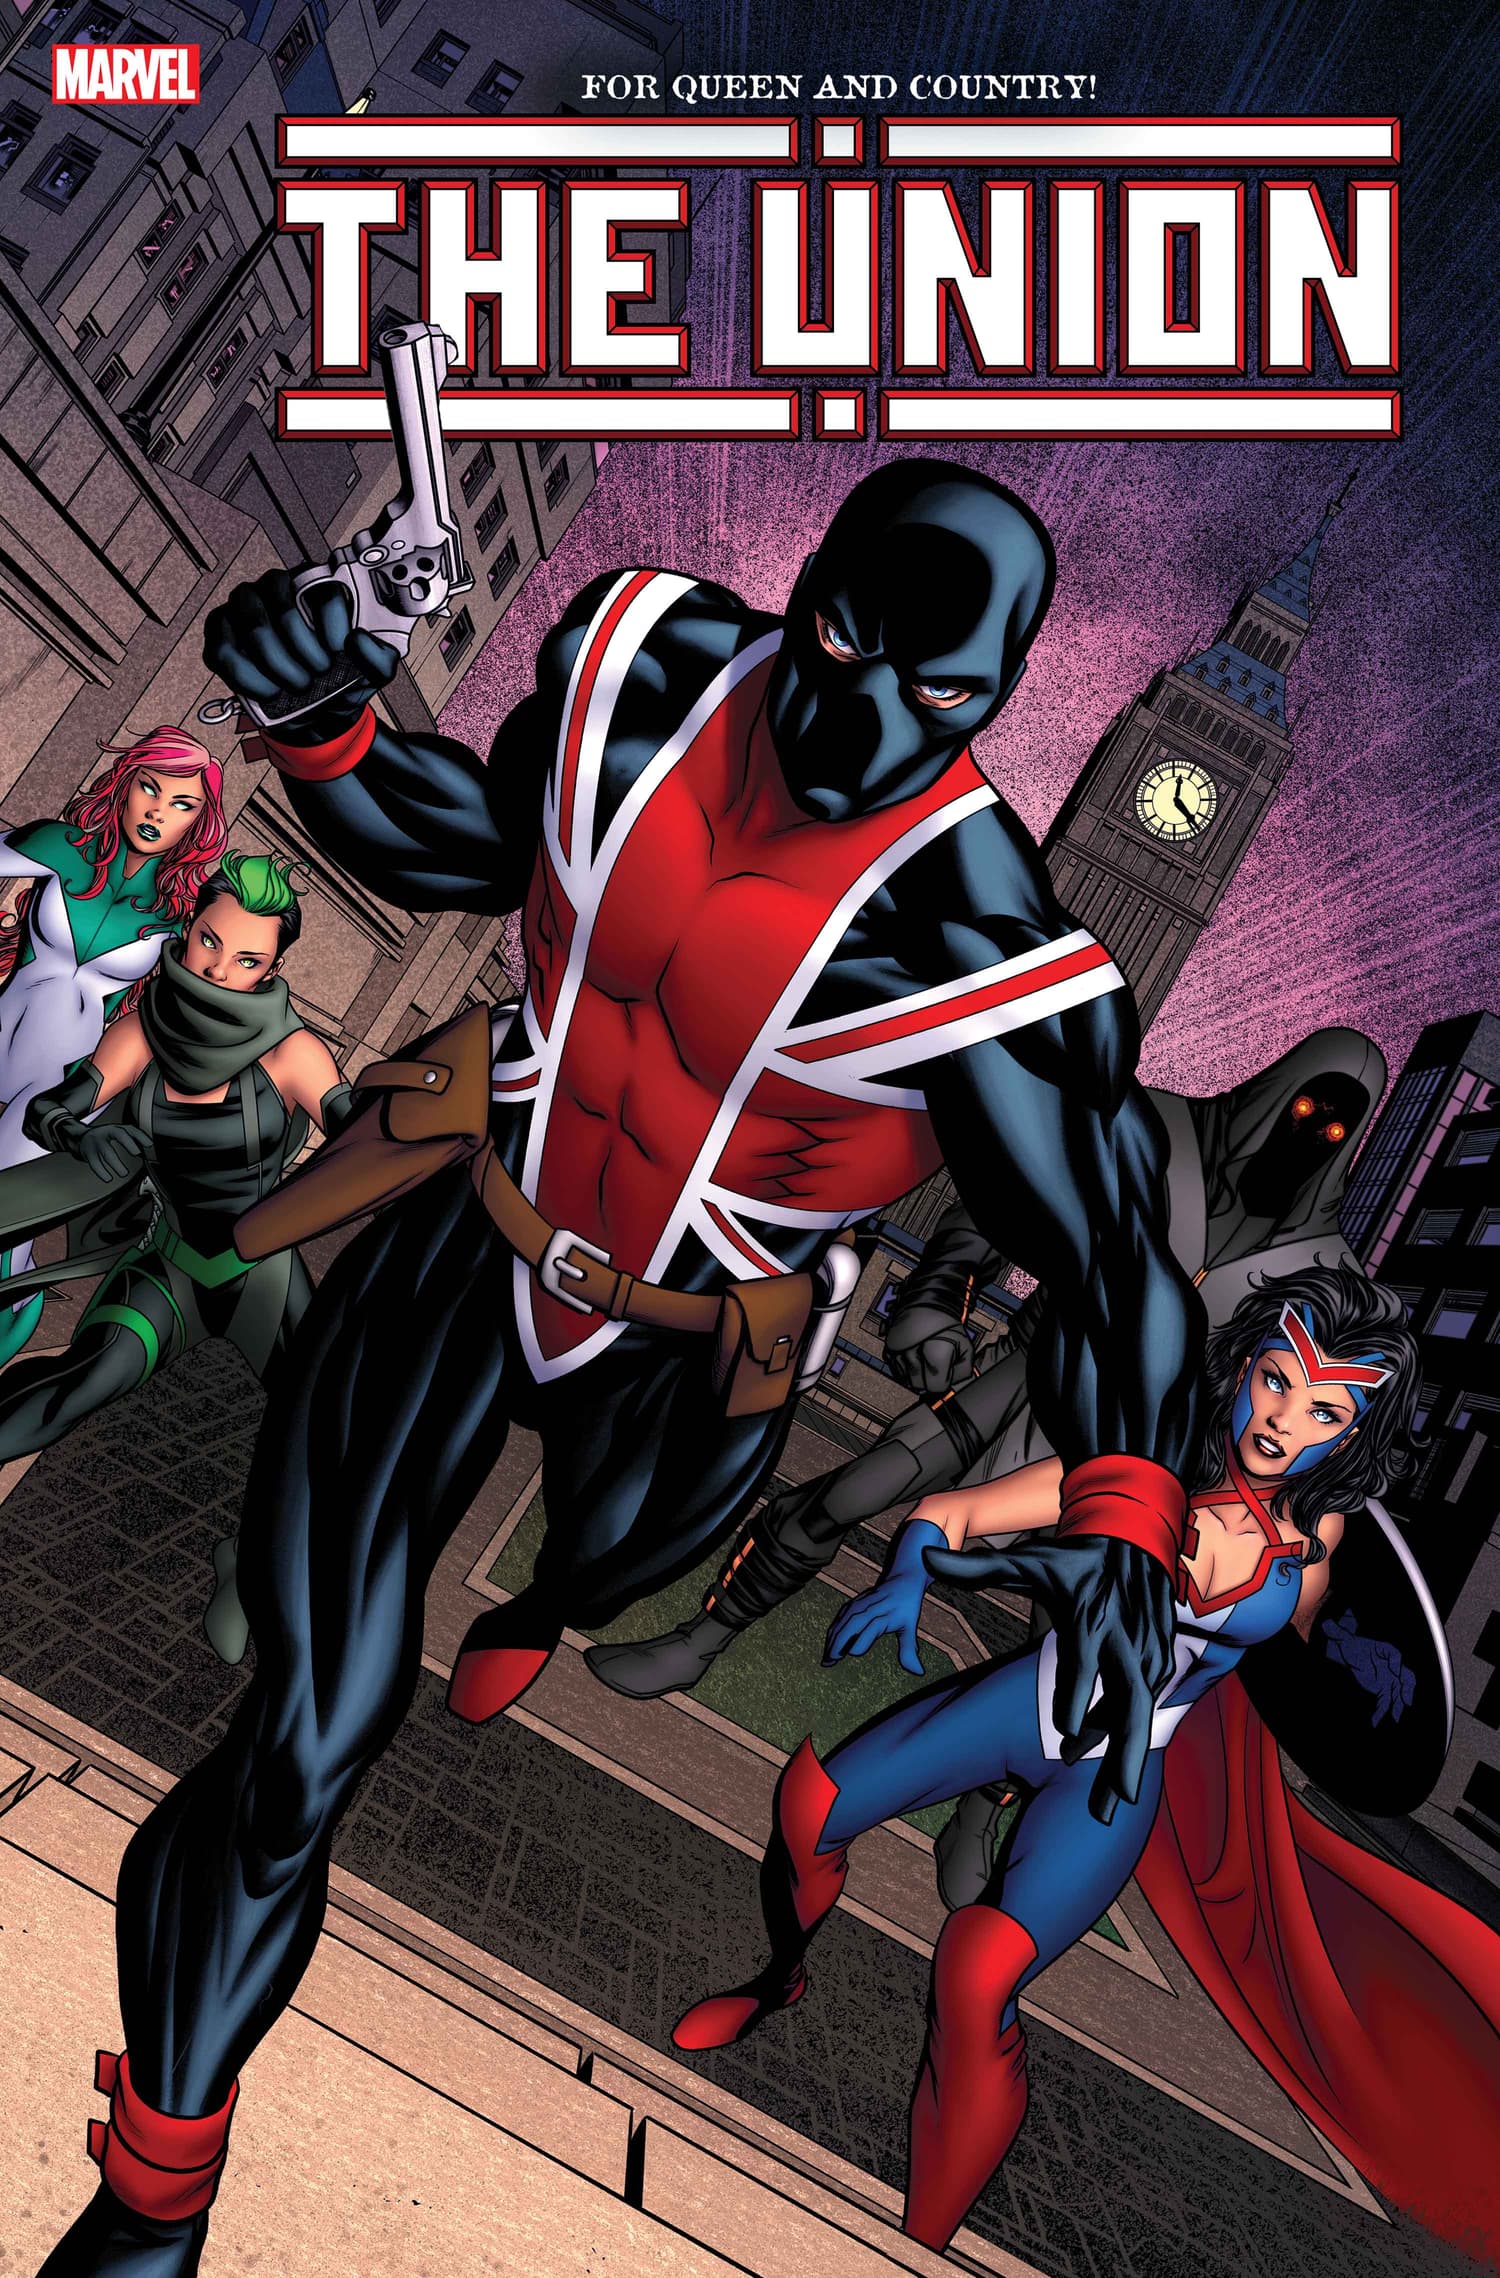 THE UNION #1 VARIANT COVER by MIKE MCKONE with colors by MORRY HOLLOWELL (MAR200867)